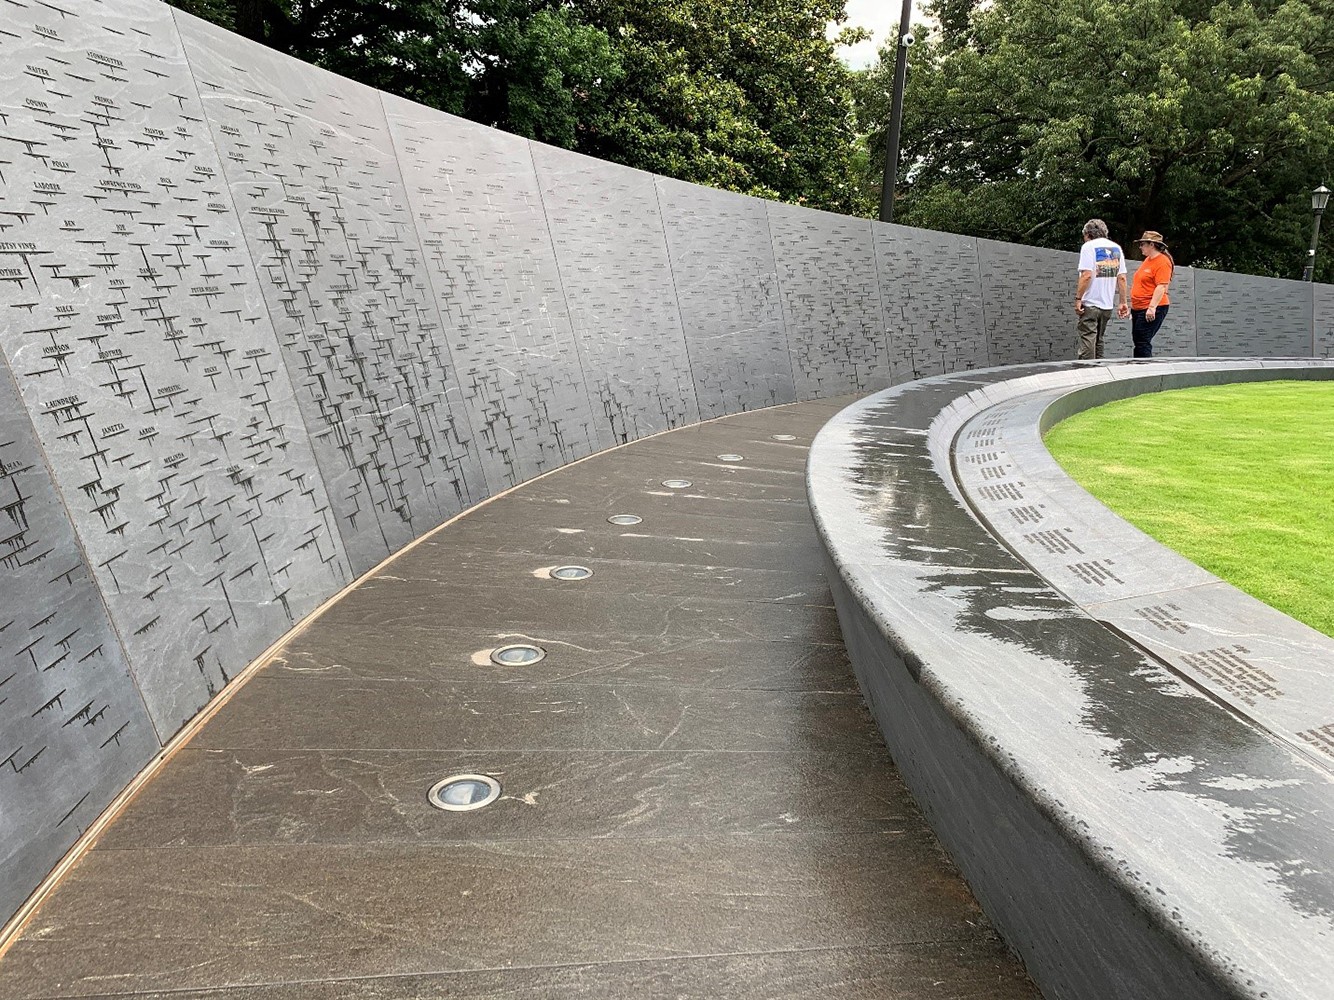 Photo credit:  Visitors at the Memorial to Enslaved Laborers at the UVA after the rain. Photo by Howeler & Yoon Architecture